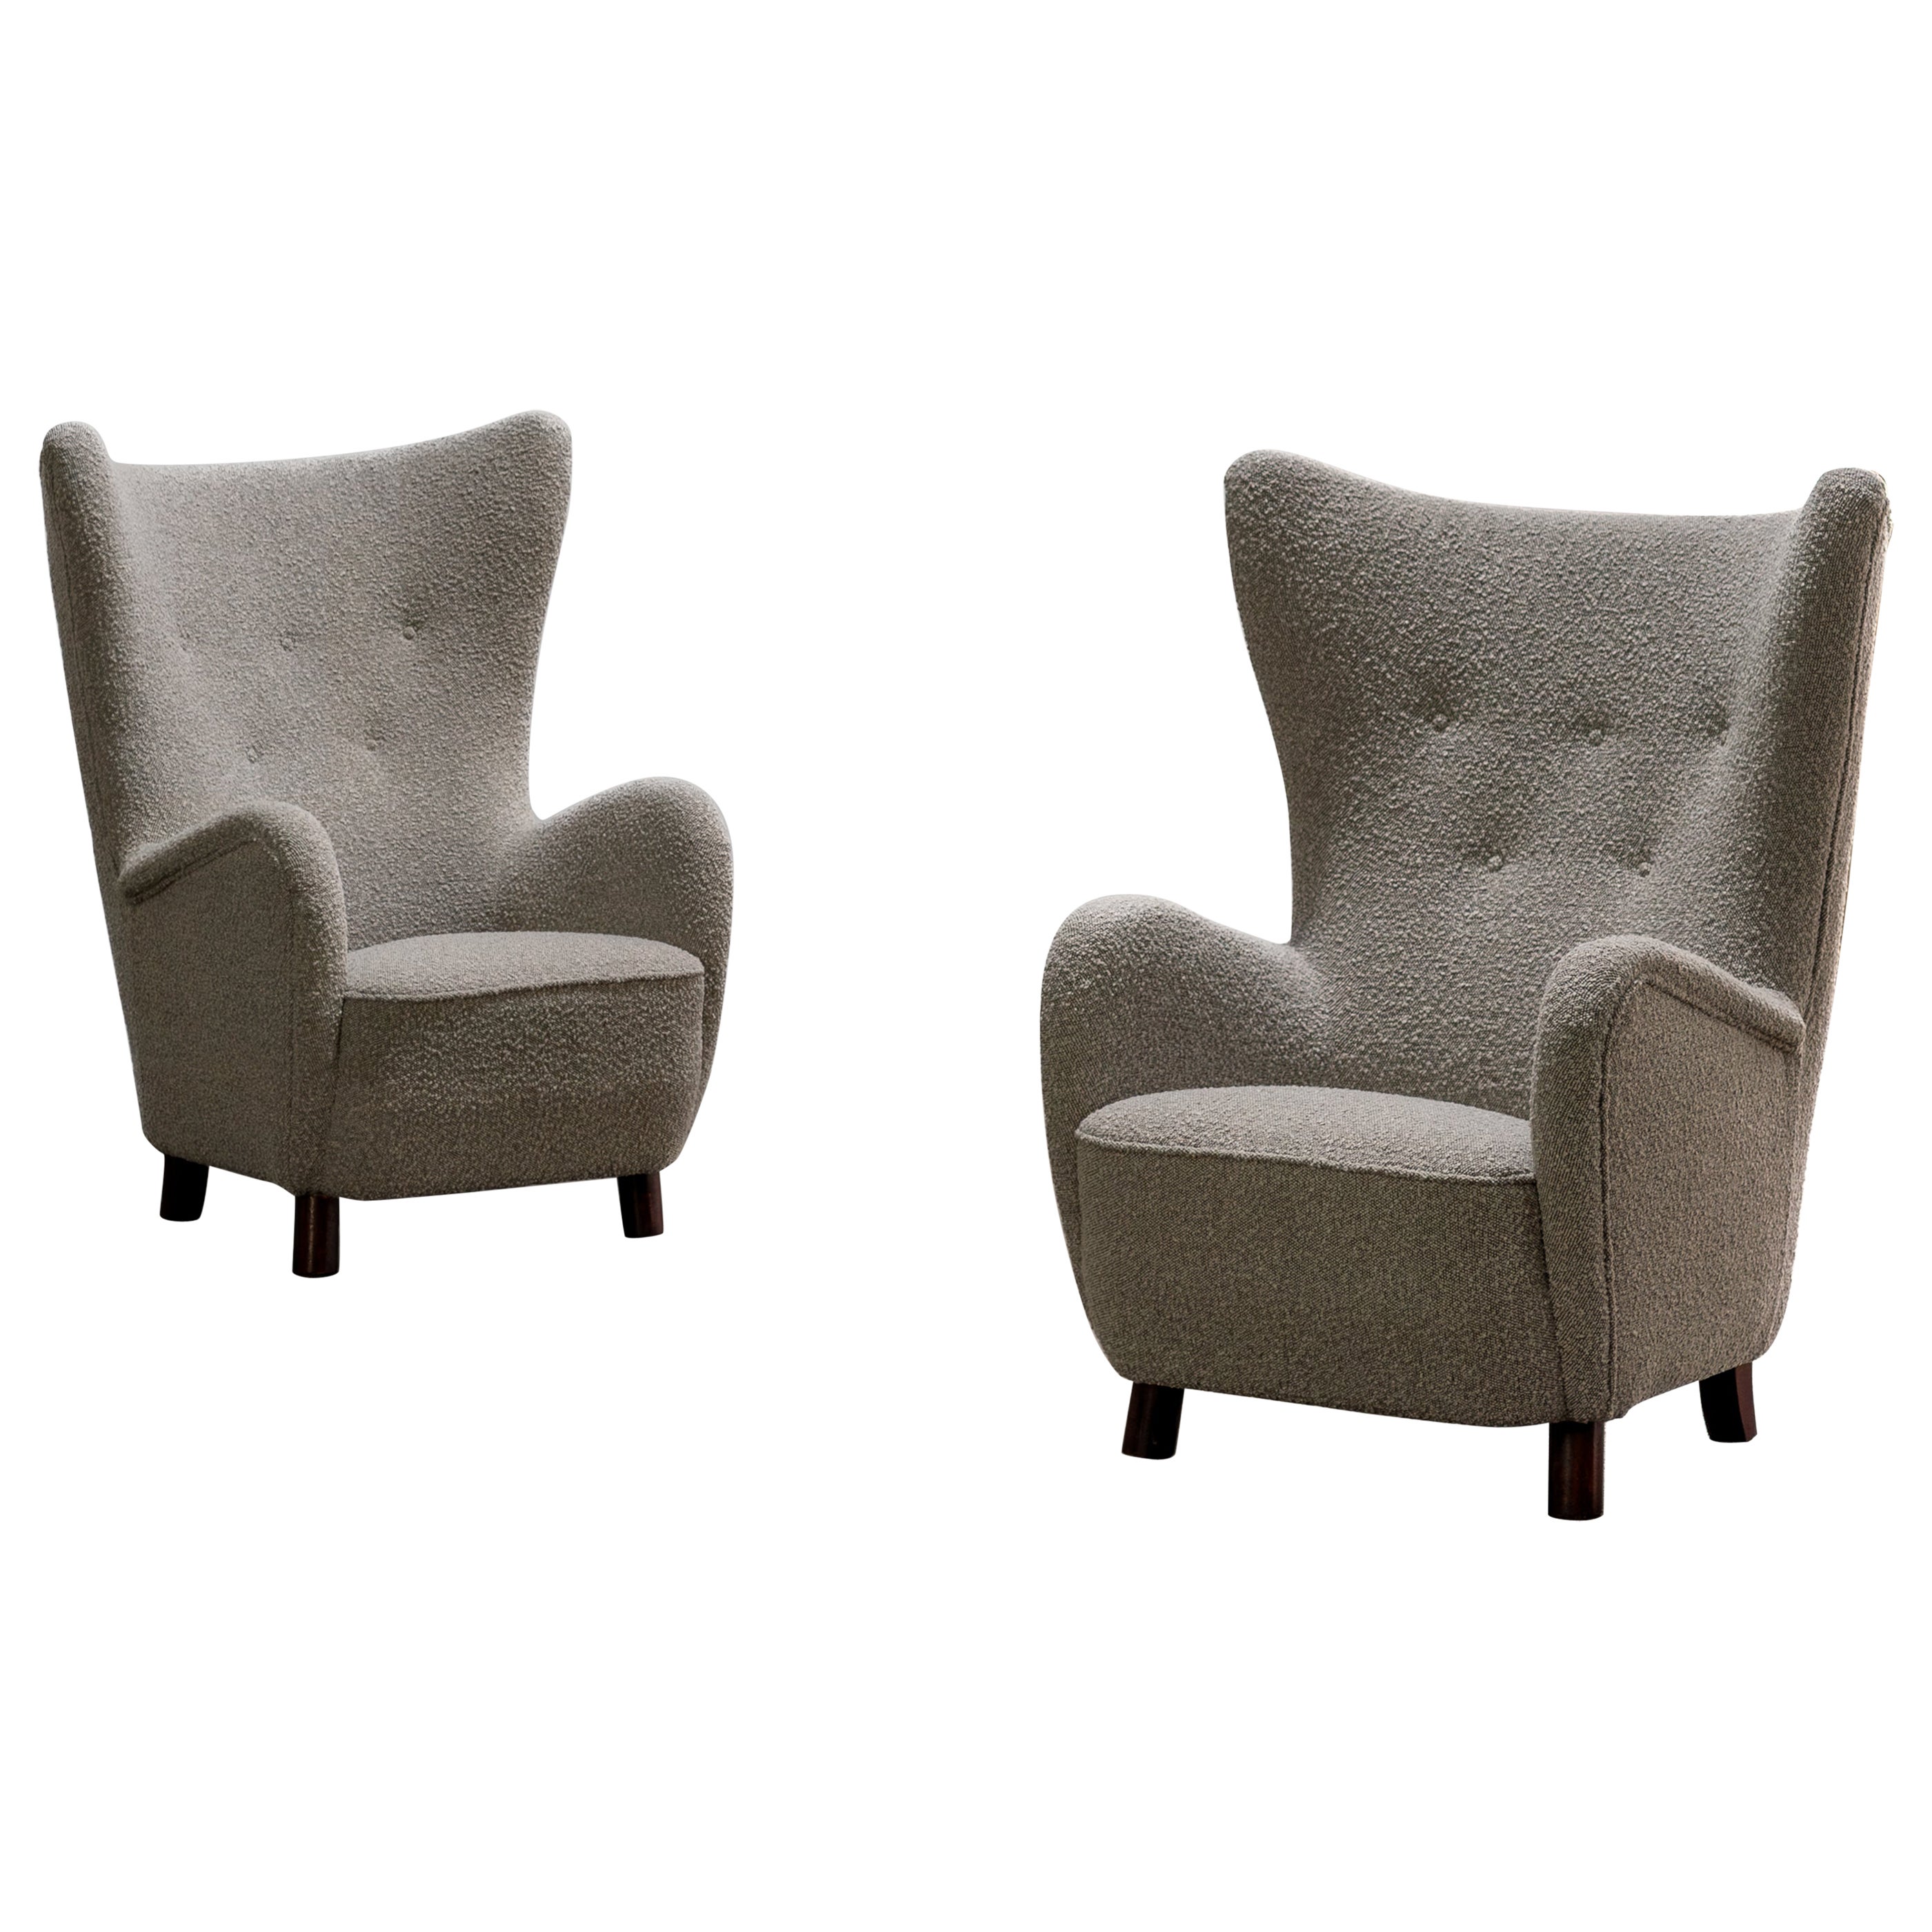 Vintage Mogens Lassen Wingback Chairs From Denmark, Boucle Fabric, 1950s